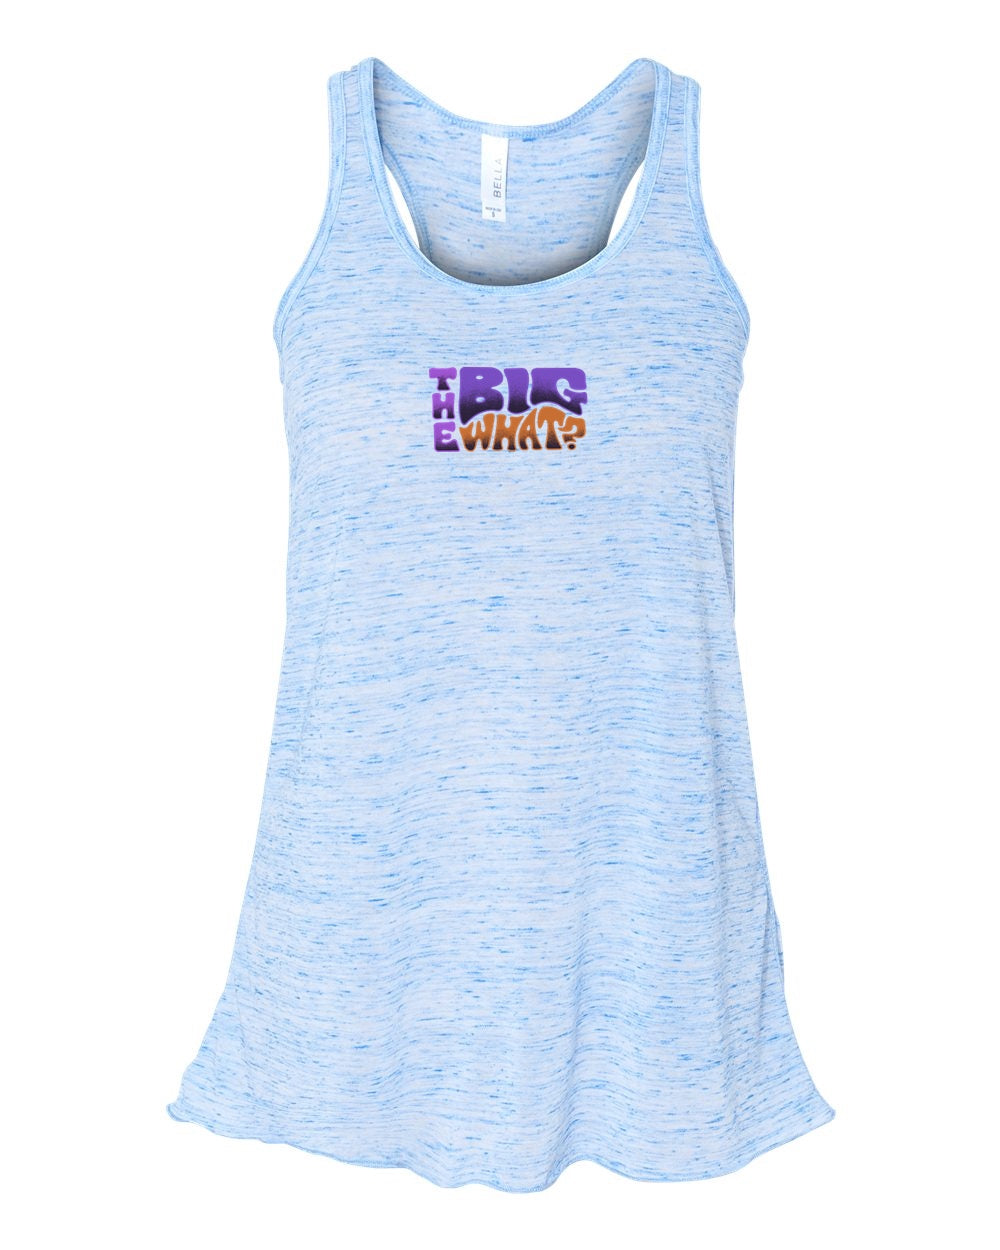 25% OFF - Big What? 2022 Womens Tank